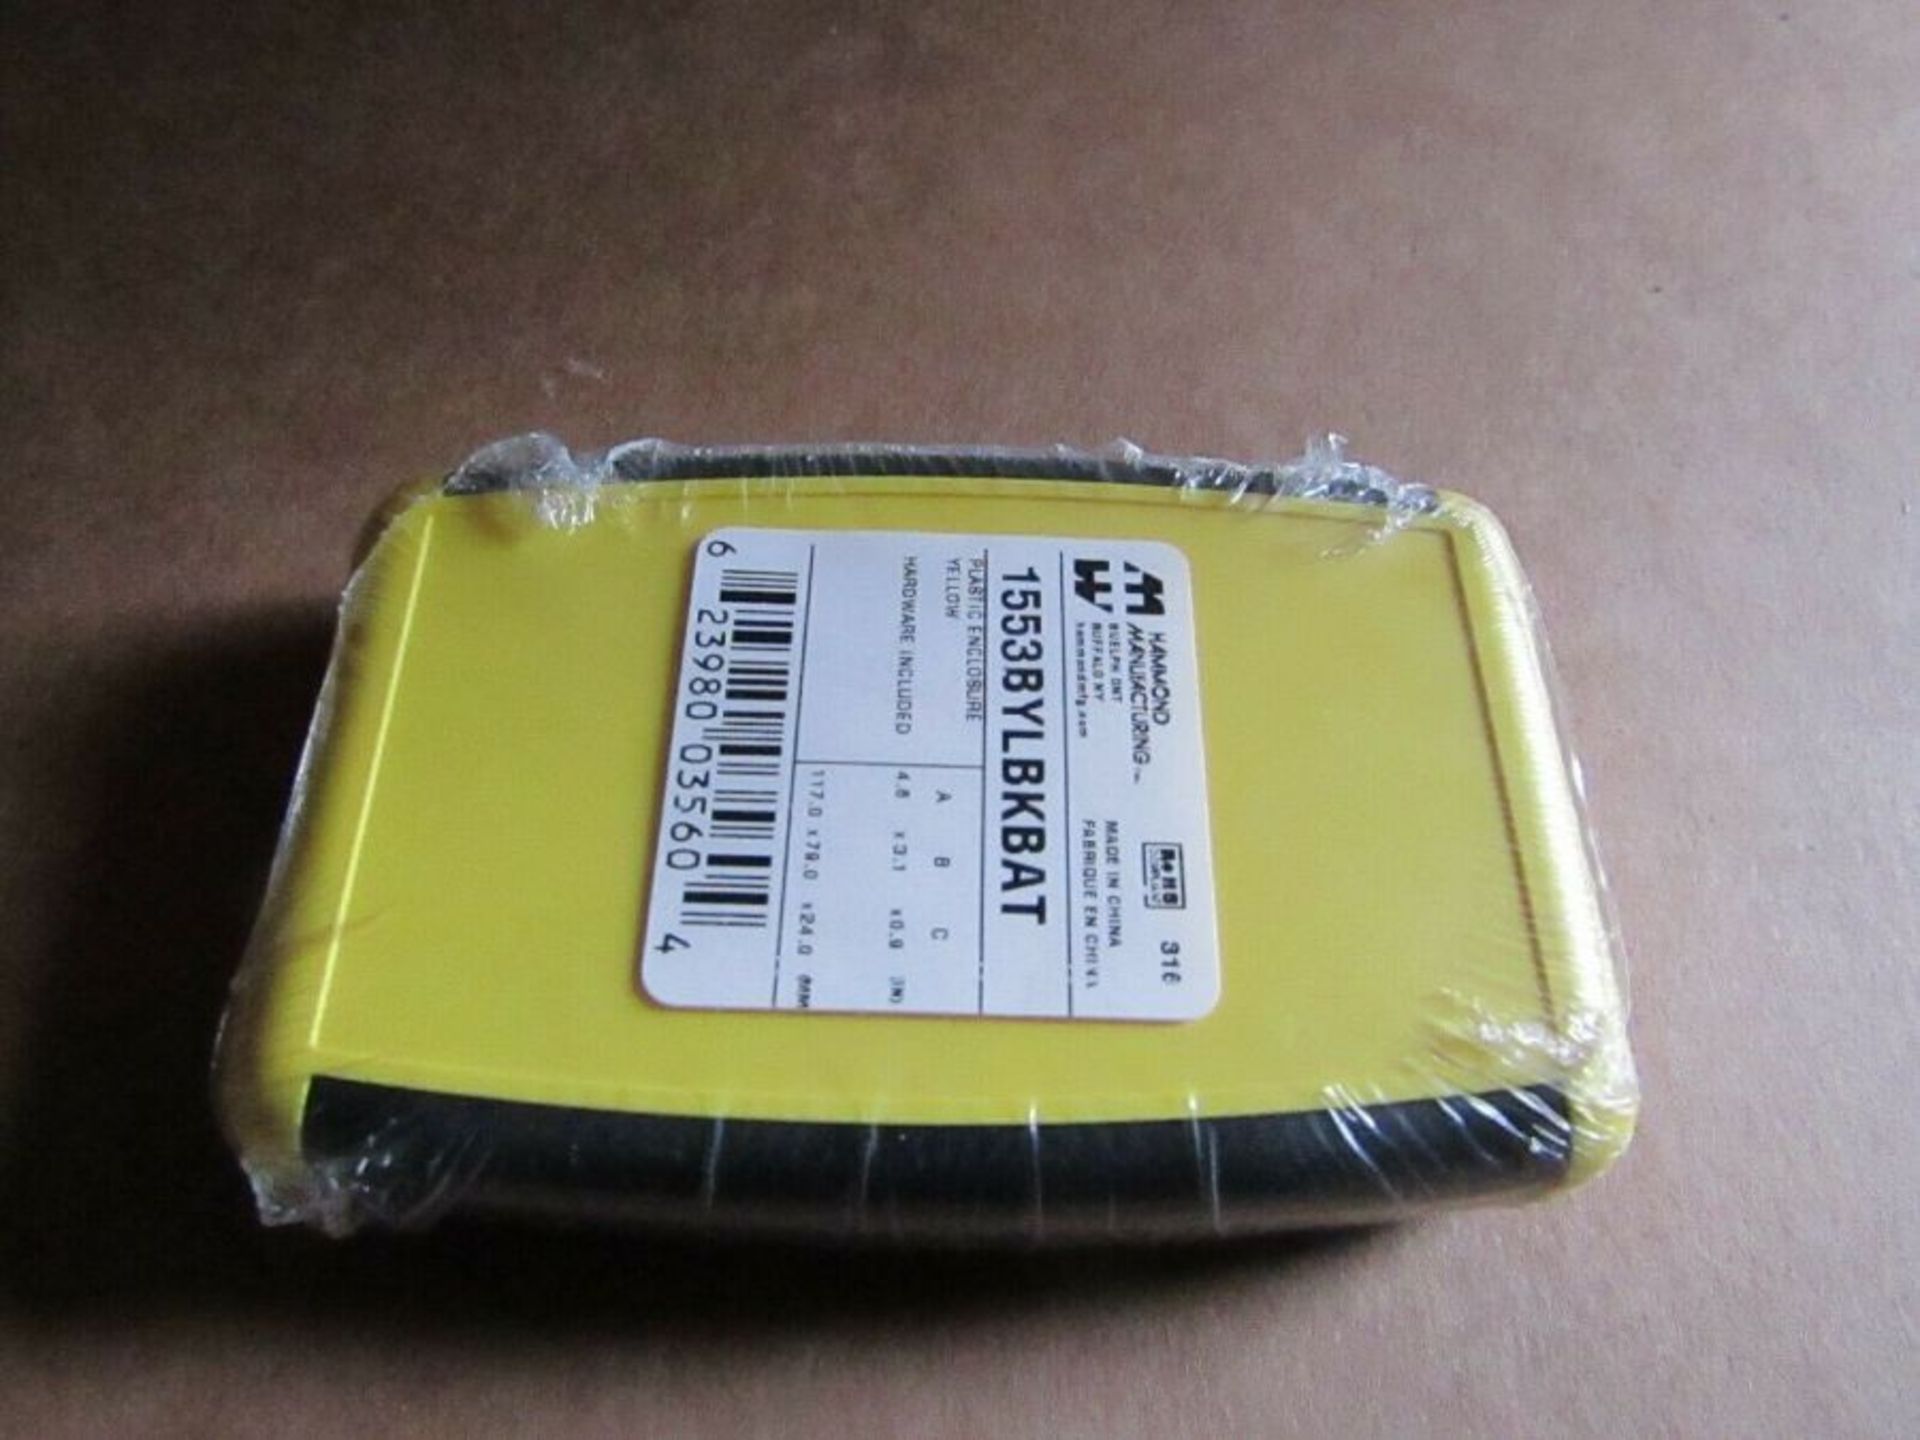 100 x Hammond 1553 Series Yellow ABS Enclosure 4.62x 3.11x 0.95 In - Image 2 of 2